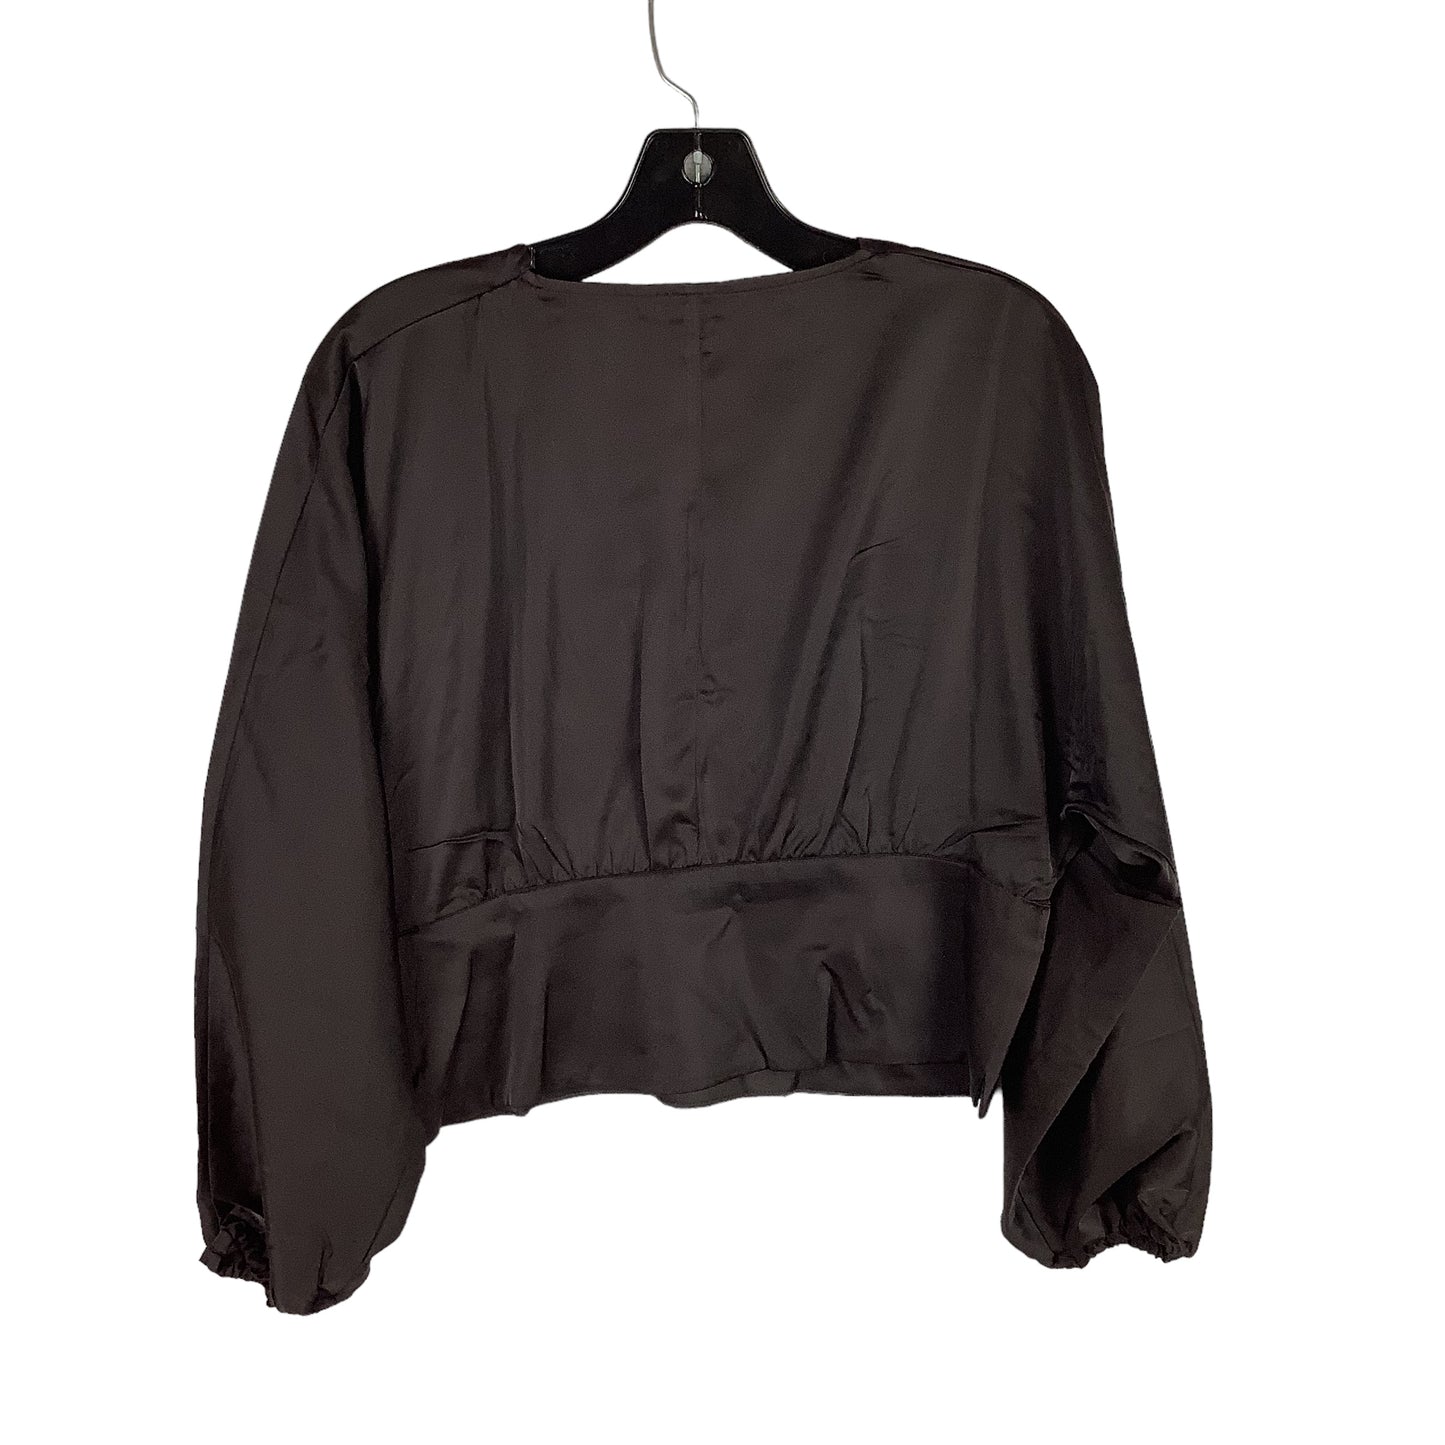 Top Long Sleeve By Banana Republic  Size: L (10)